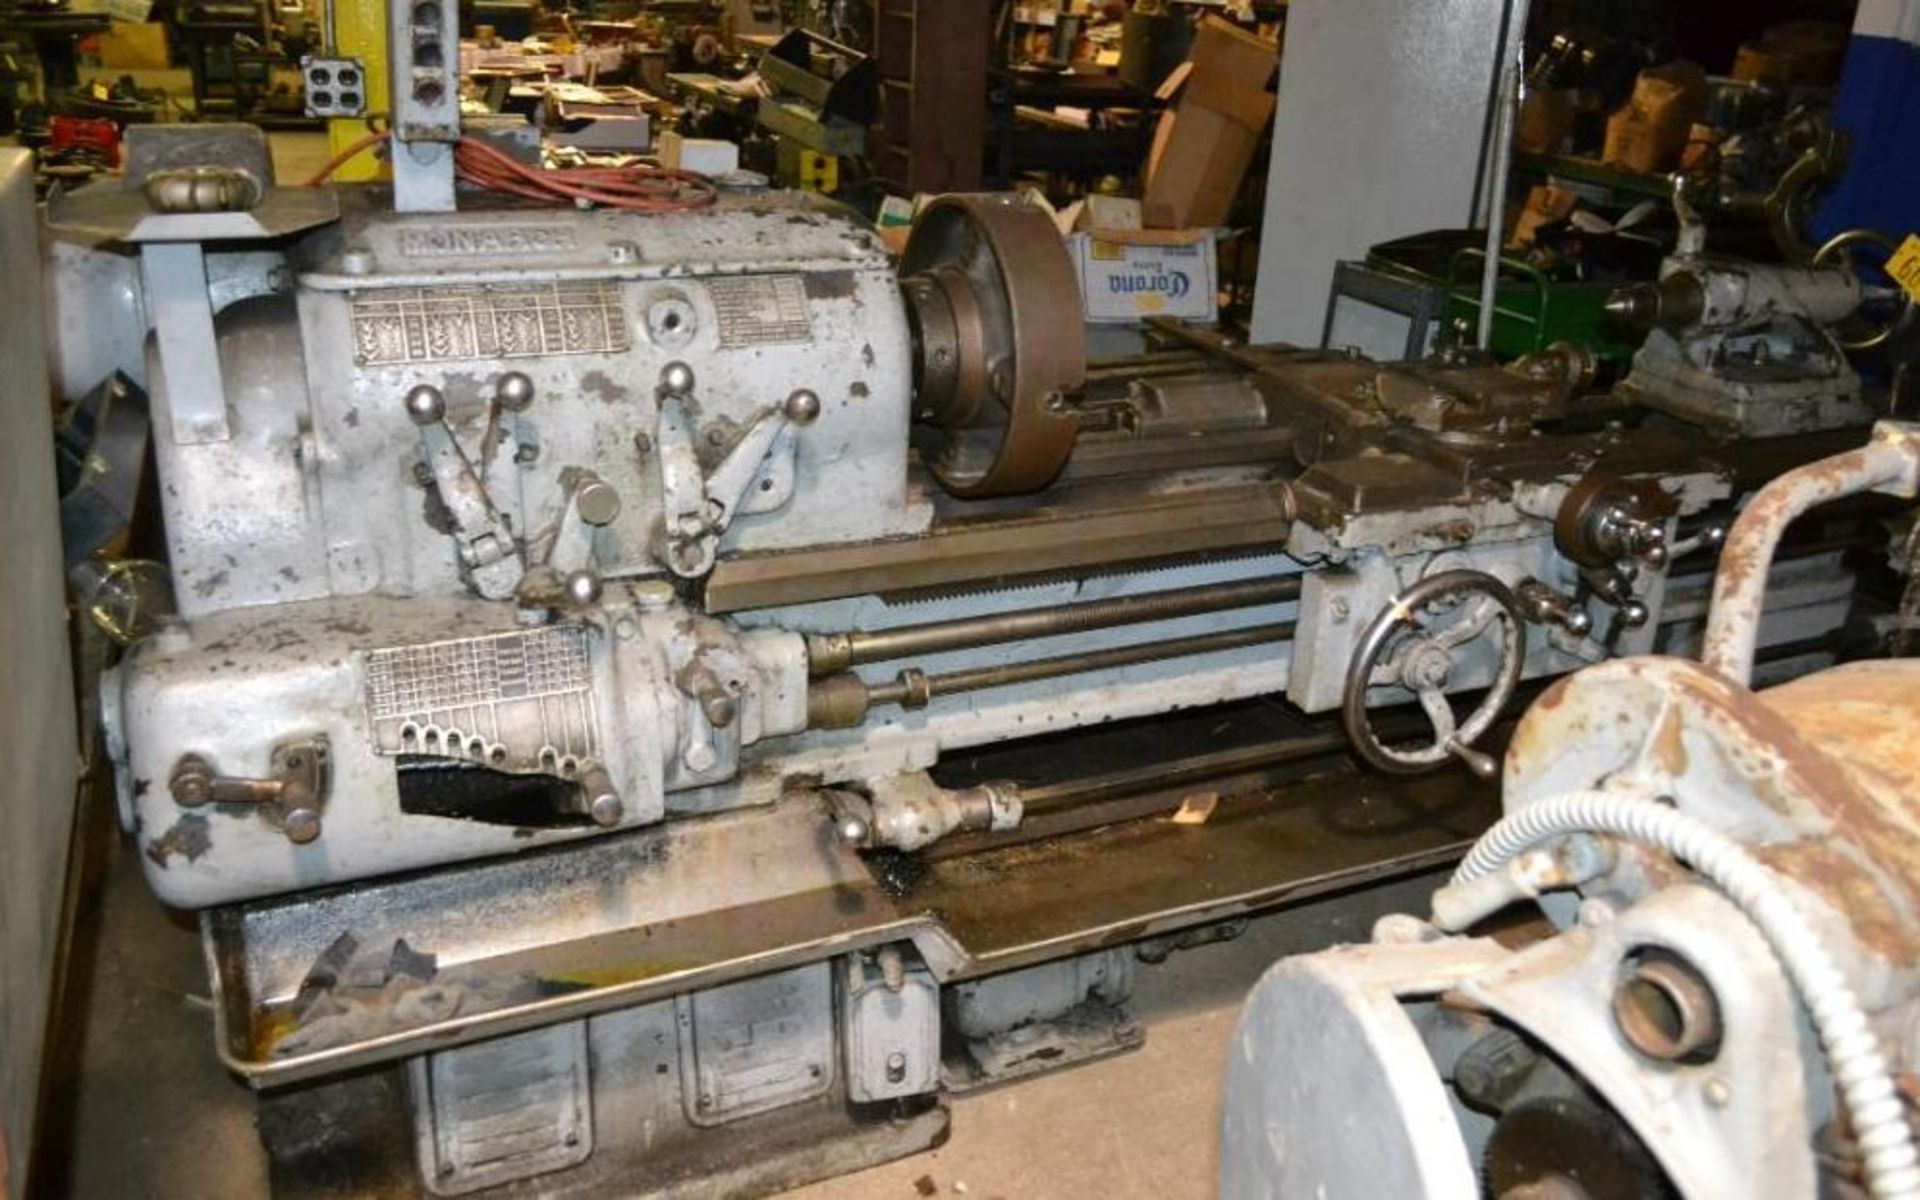 Monarch 16" x 54" Geared Head Engine Lathe S/N 11996 20-850 RPM 16" 4-Jaw Chuck, Carriage with Cross